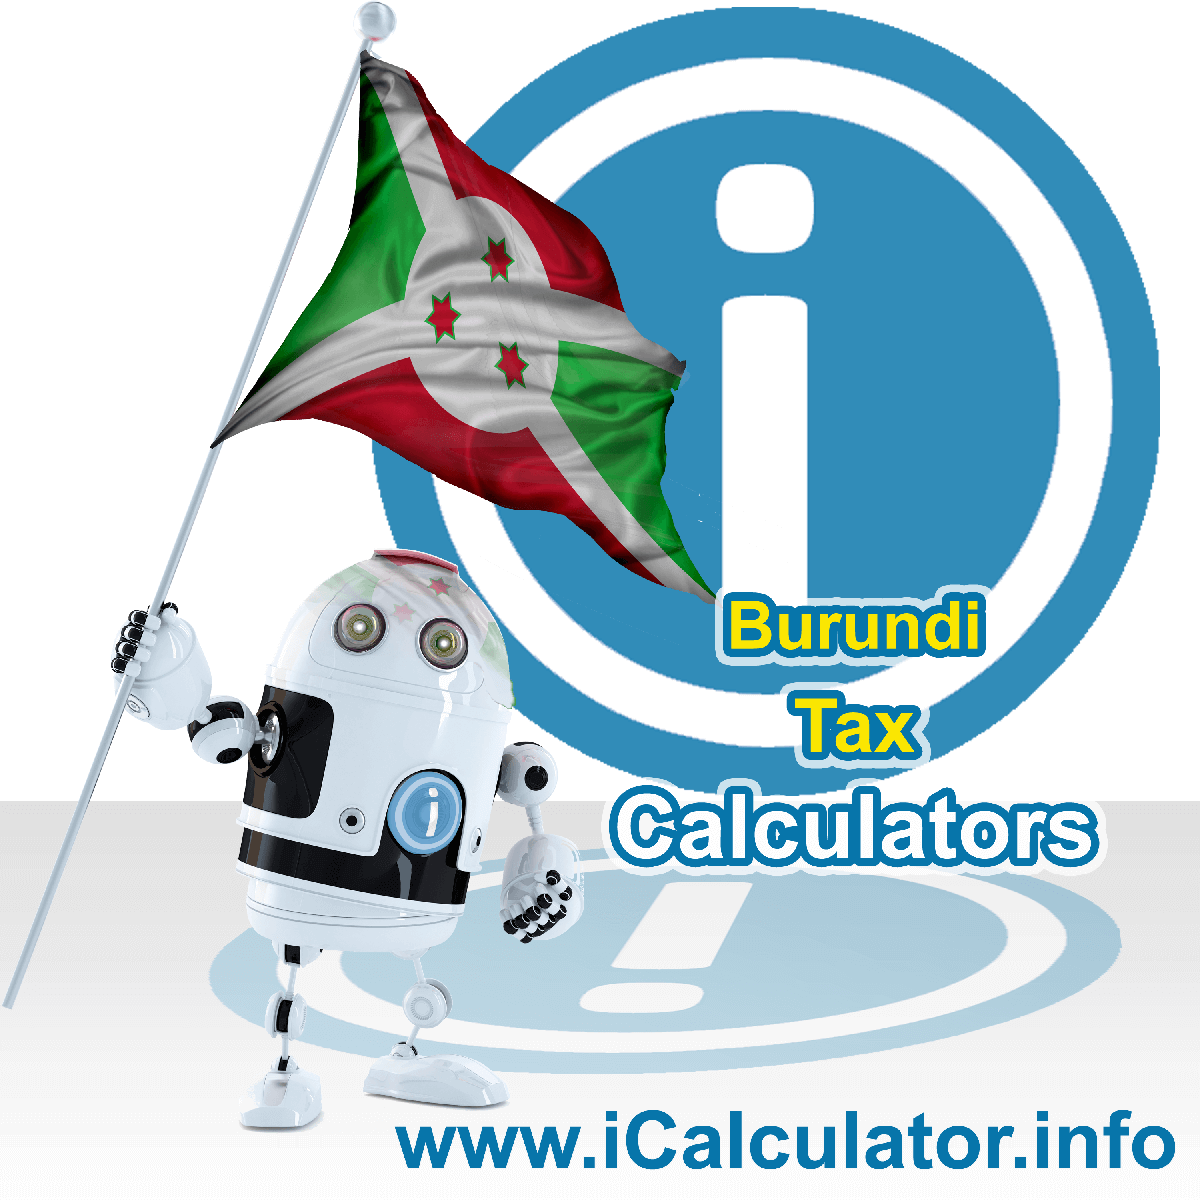 Burundi Tax on Interest Calculator. This image shows the Burundi flag and information relating to the interest tax rate formula used for calculating Tax on Interest in Burundi using the Burundi Tax on Interest Calculator in 2023